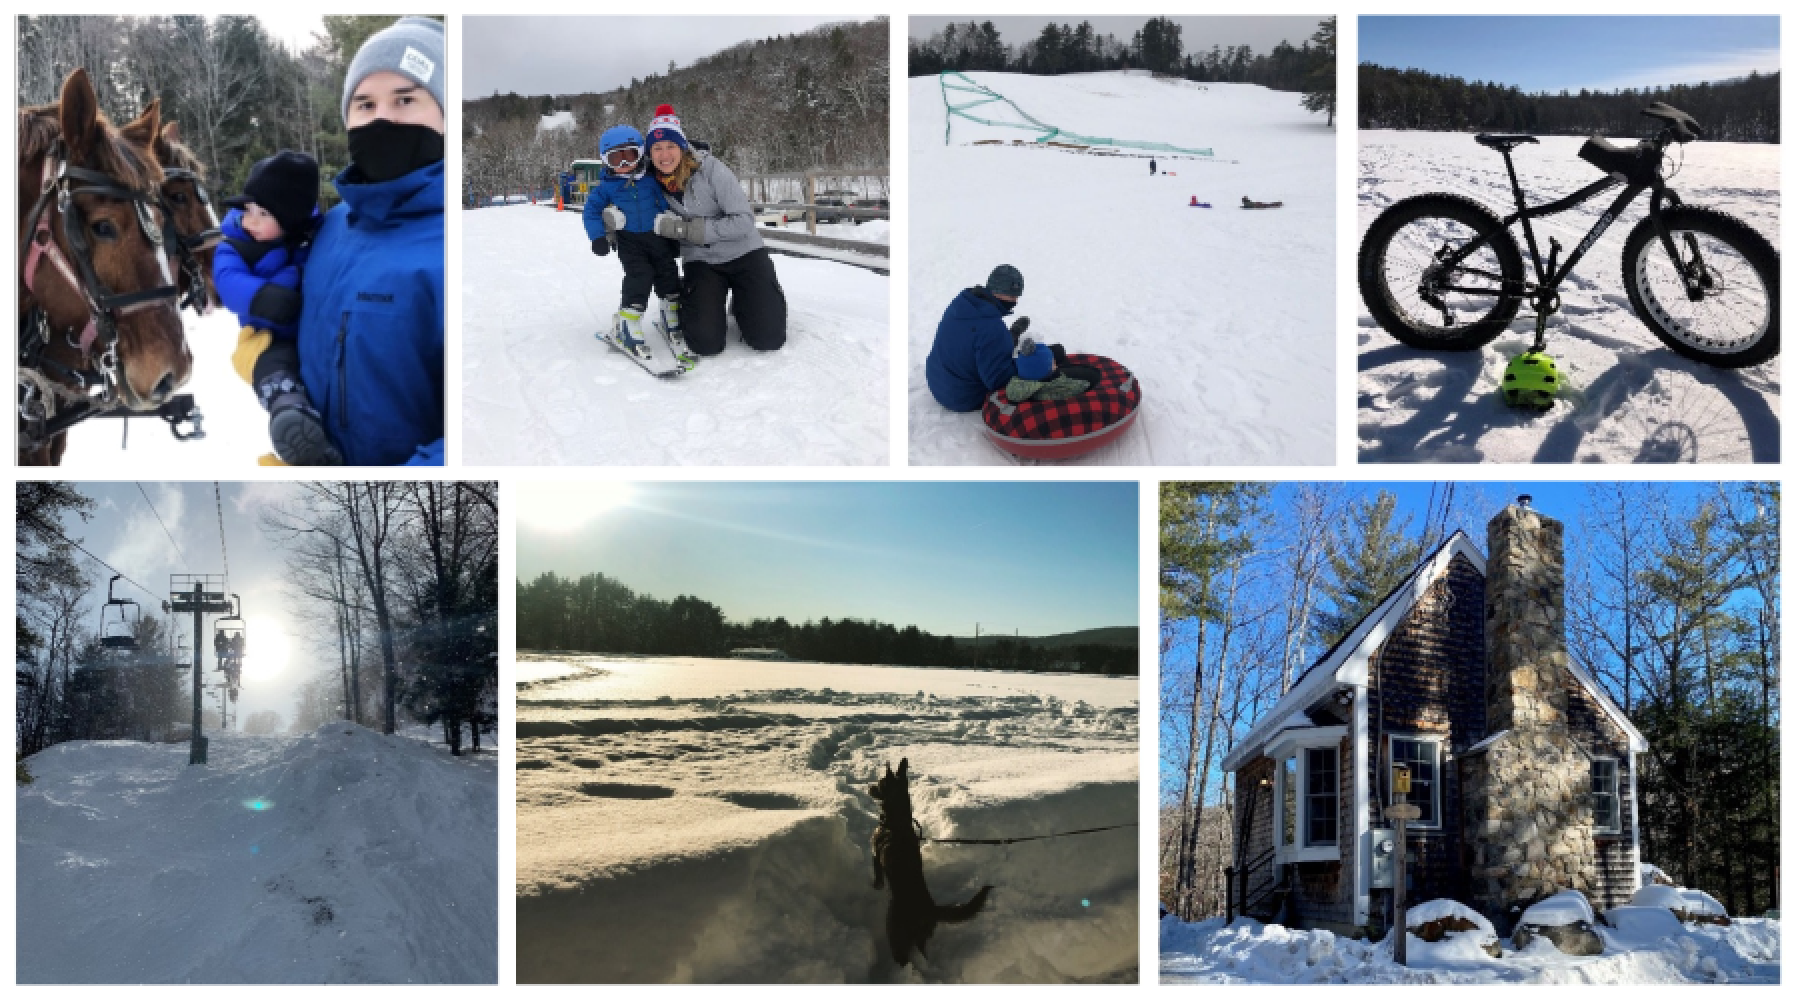 Collage of winter activities at Tuck